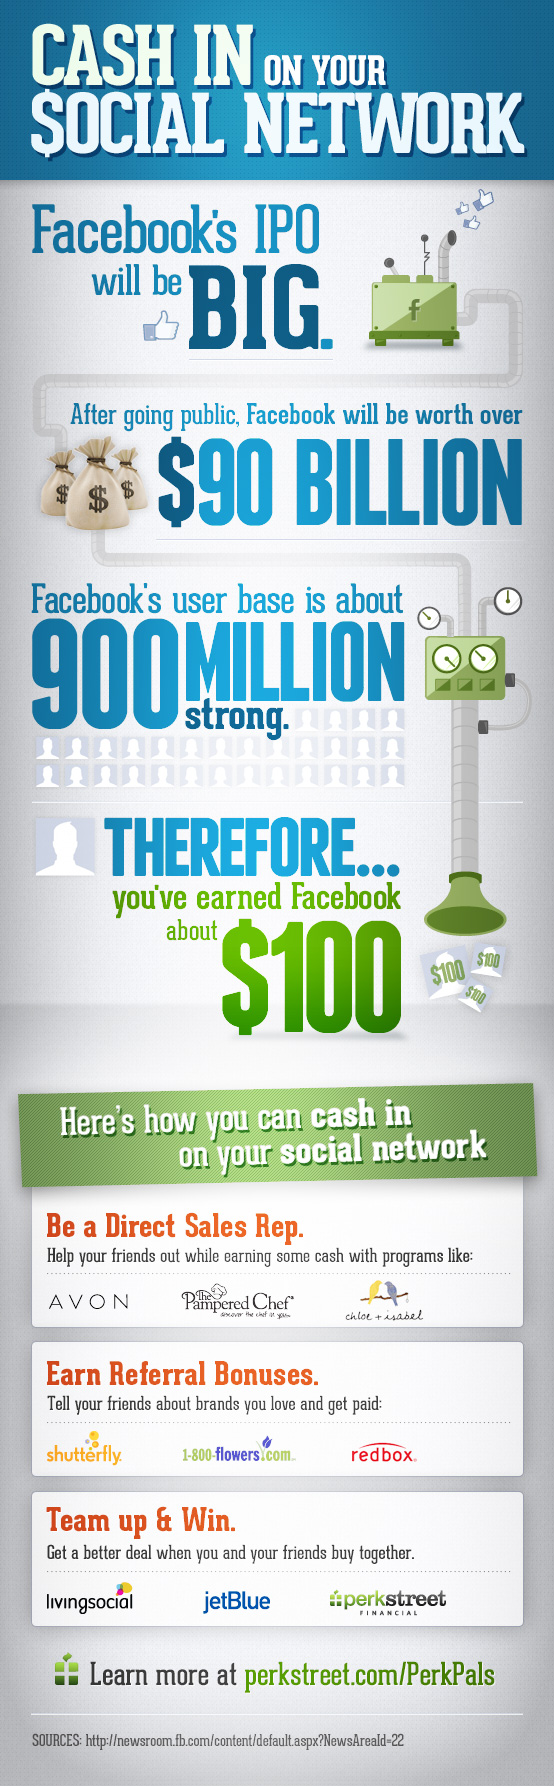 Cash In On Your Social Network